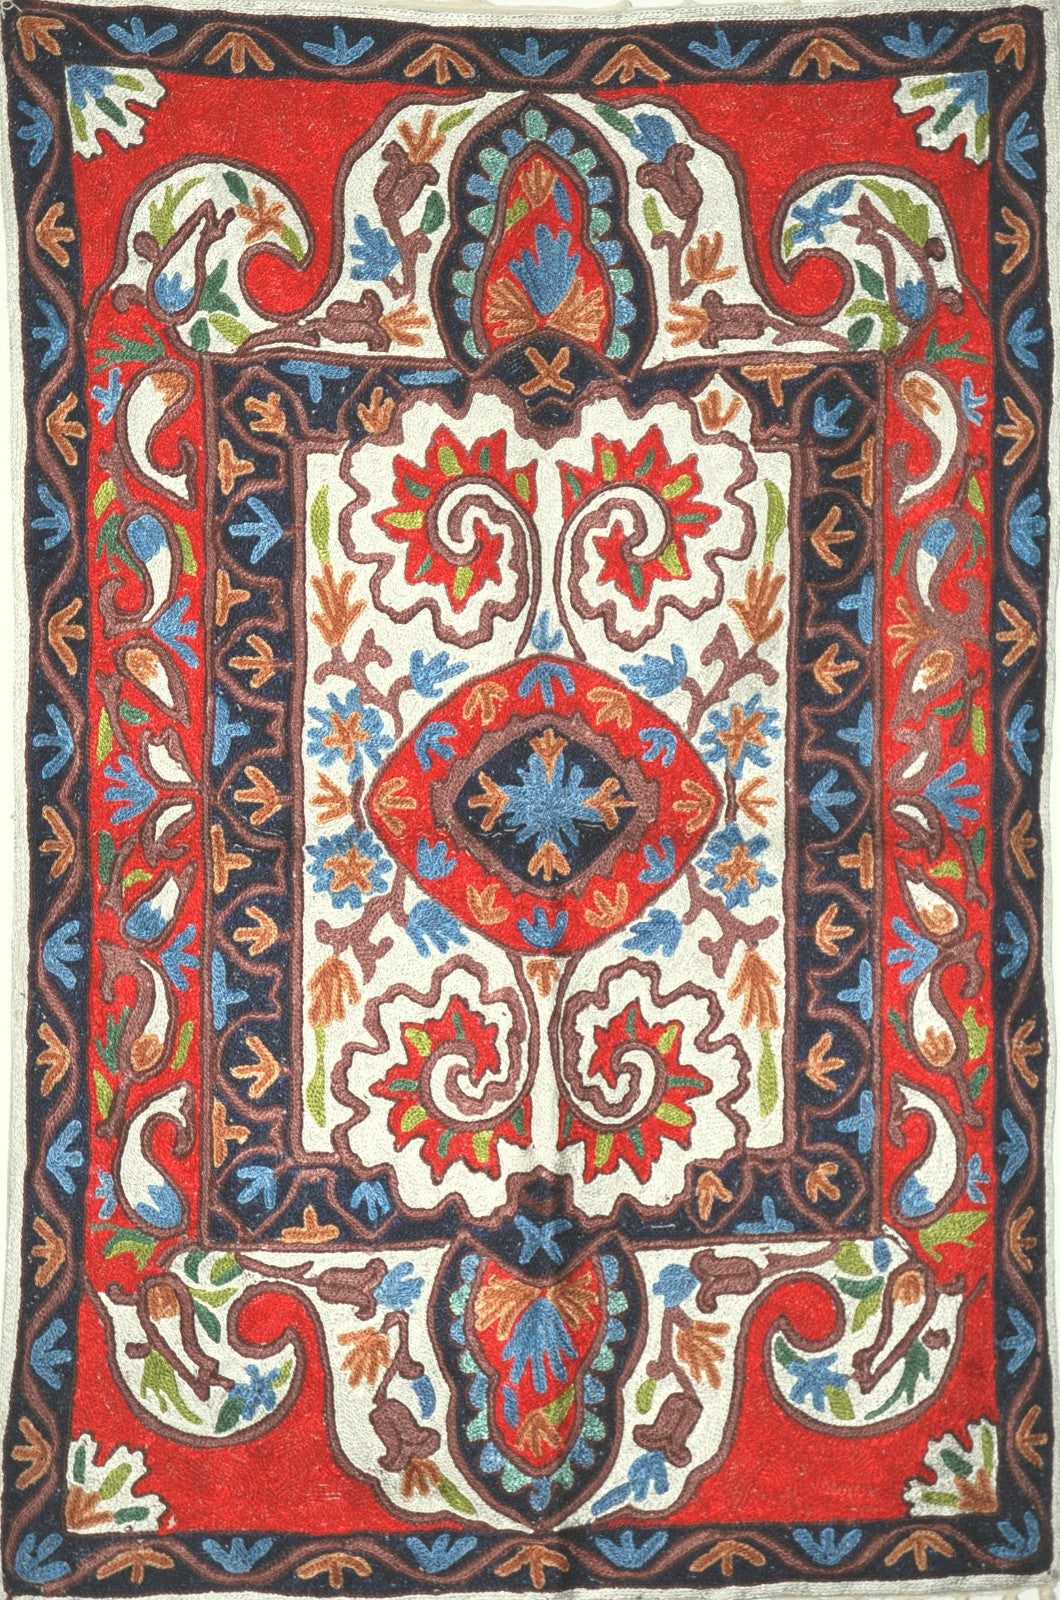 ChainStitch Tapestry Silk Wall Hanging Area Rug, Multicolor Embroidery 2x3 feet #CWR6202